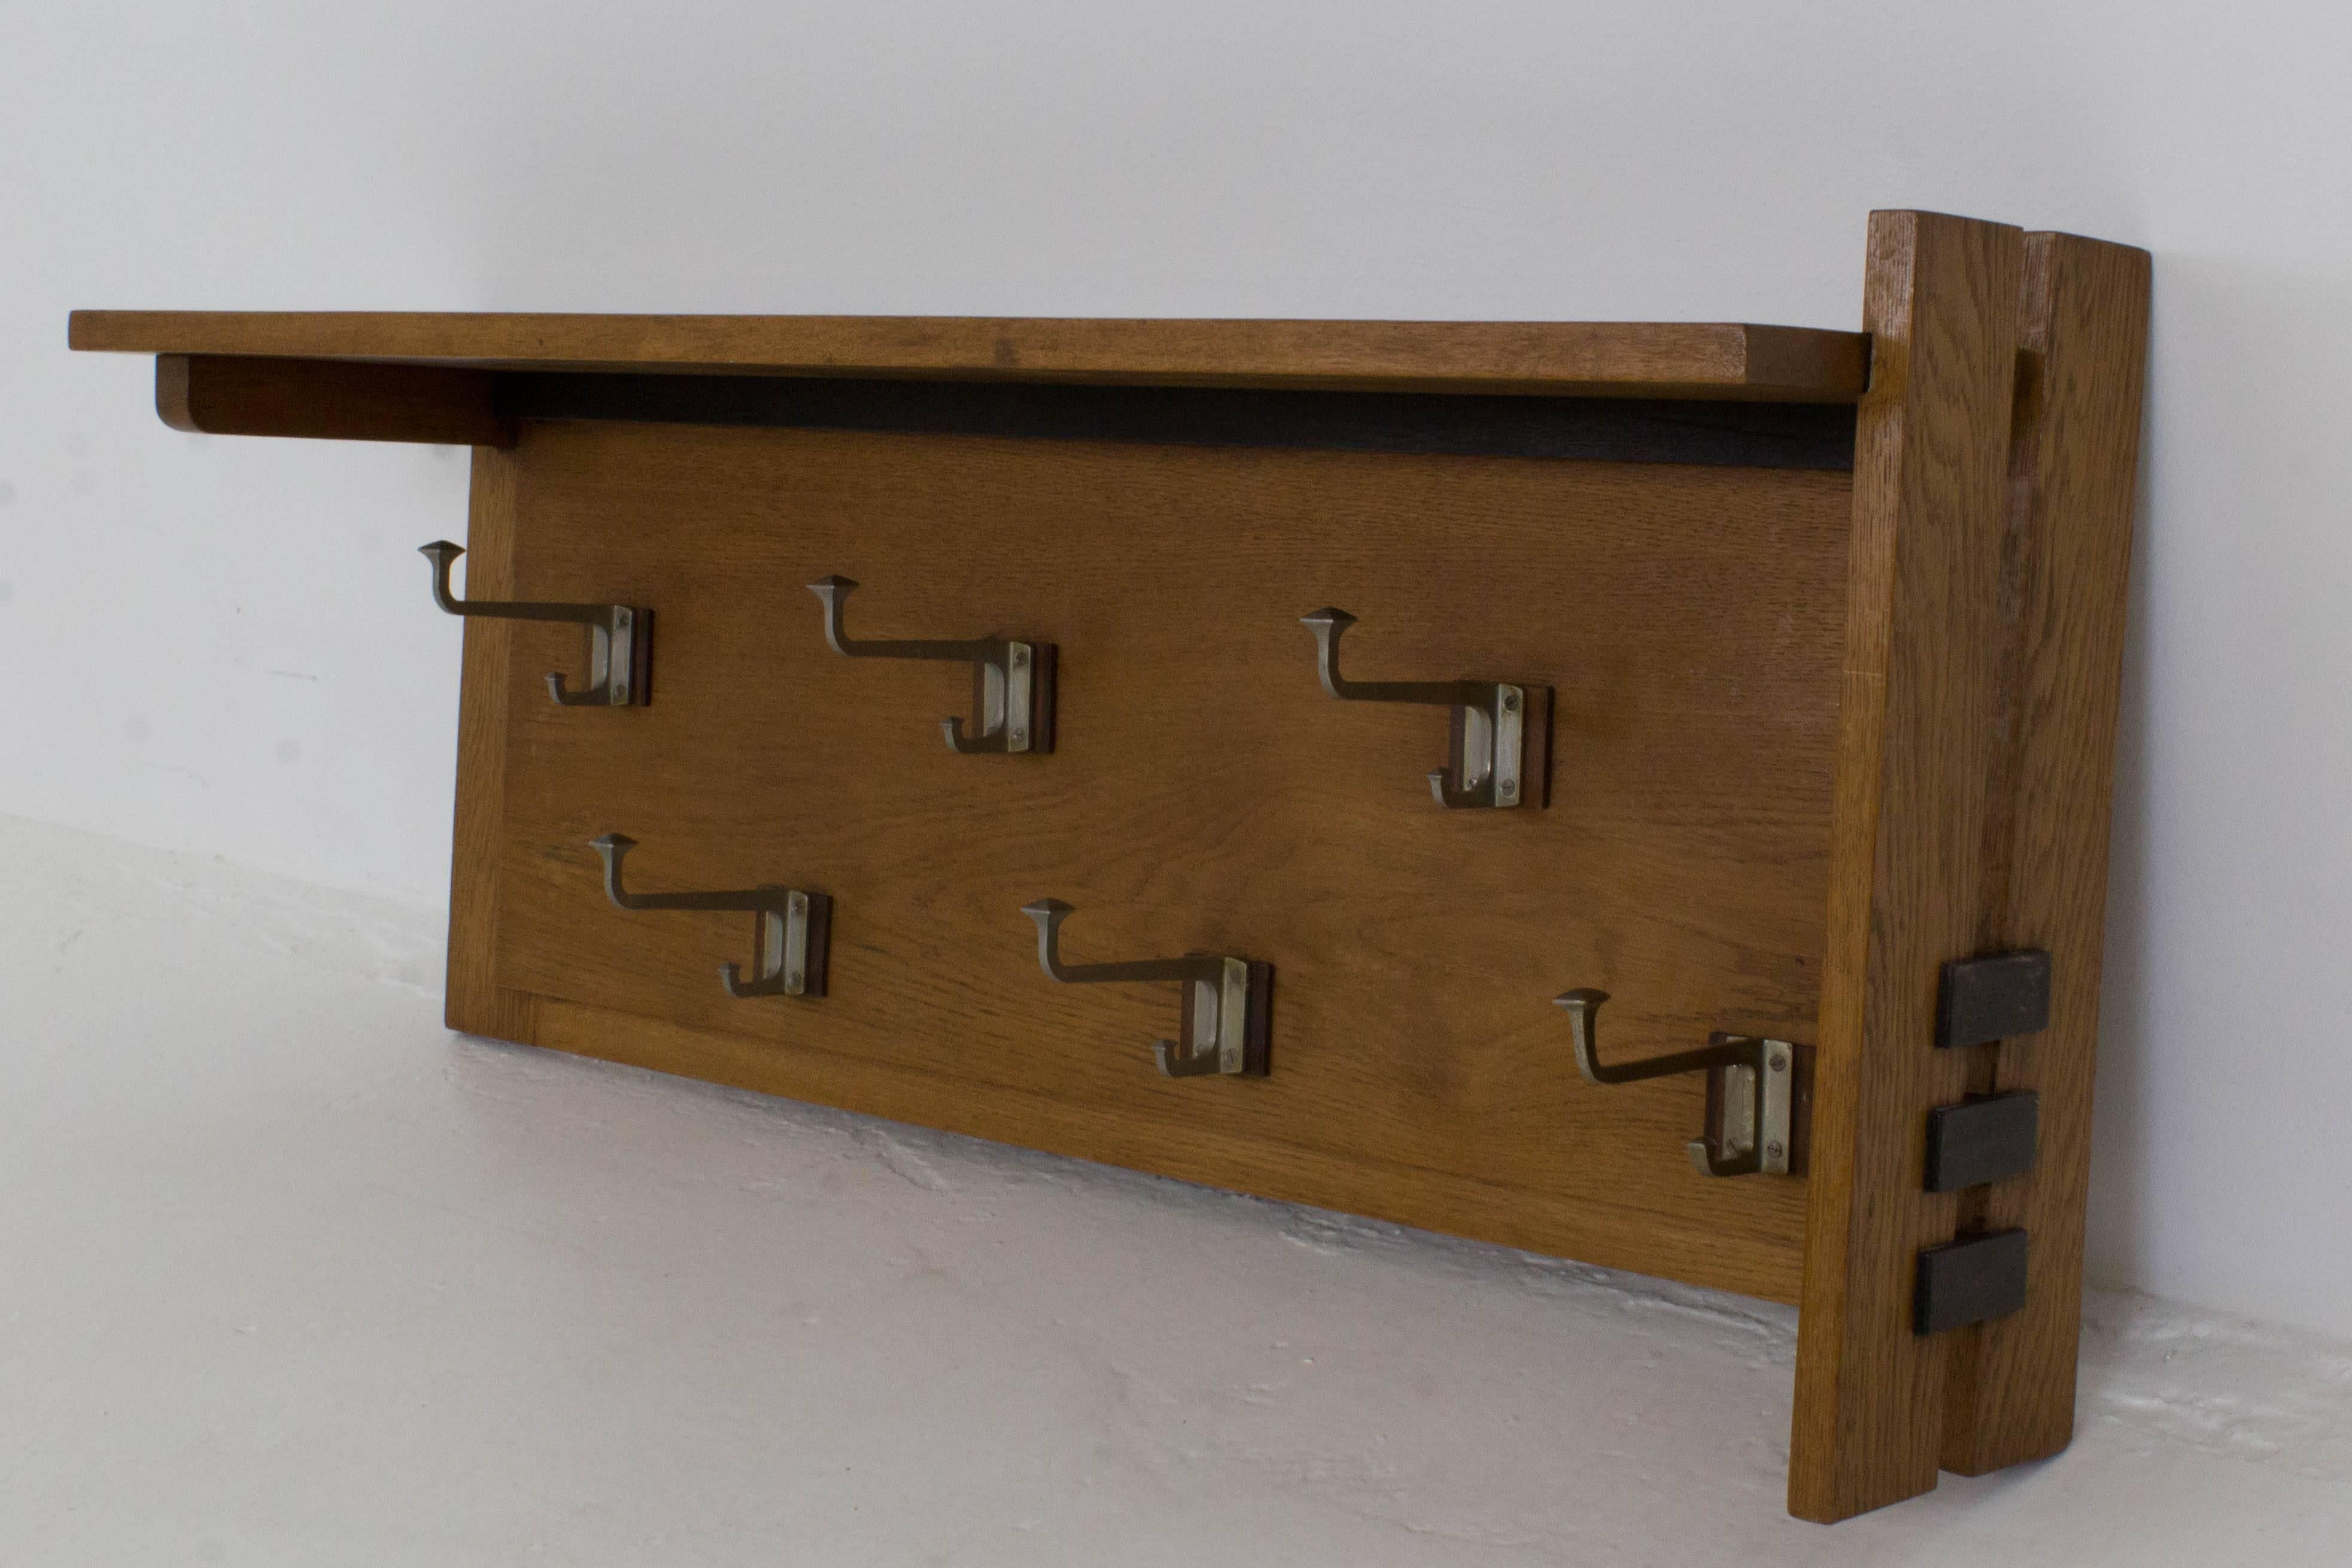 Stylish Art Deco Haagse School coat rack by P.E.L.Izeren for Genneper Molen
1920s.
Solid oak/Macassar with original nickel-plated hooks.
In good original condition with minor wear consistent with age and use,
preserving a beautiful patina.
 